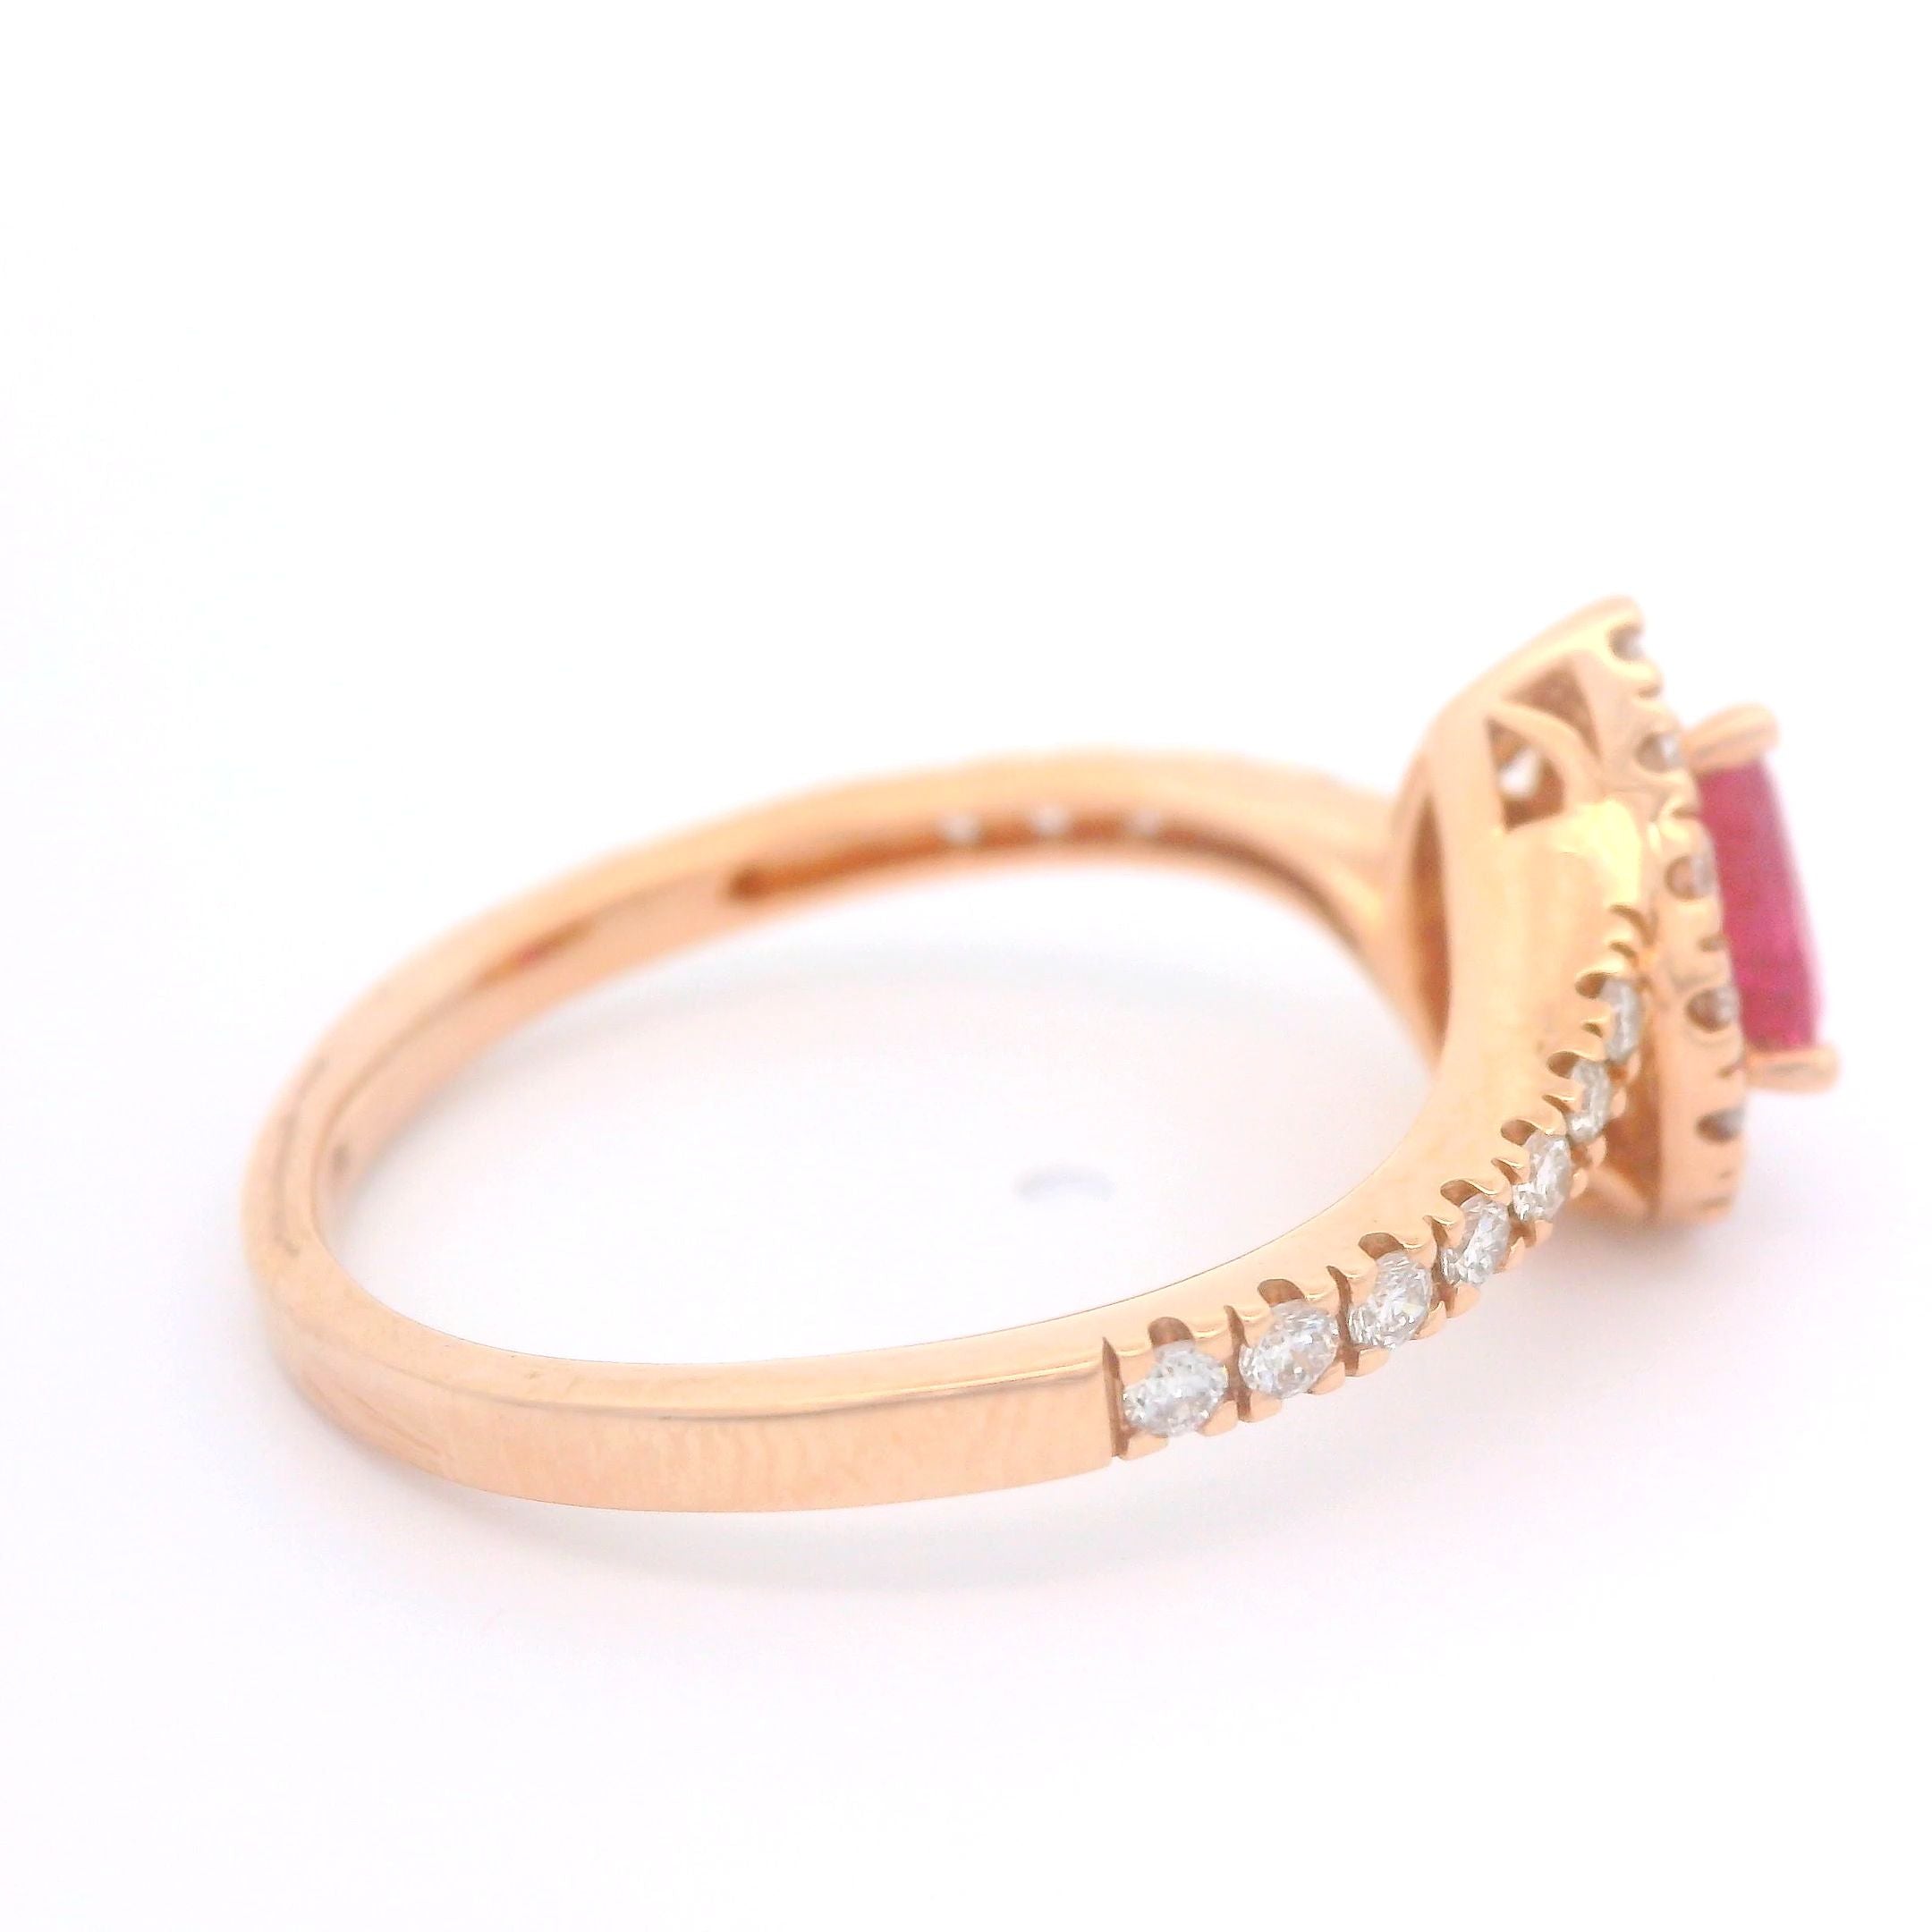 Pear Shaped Ruby and Diamond Ring 14KR